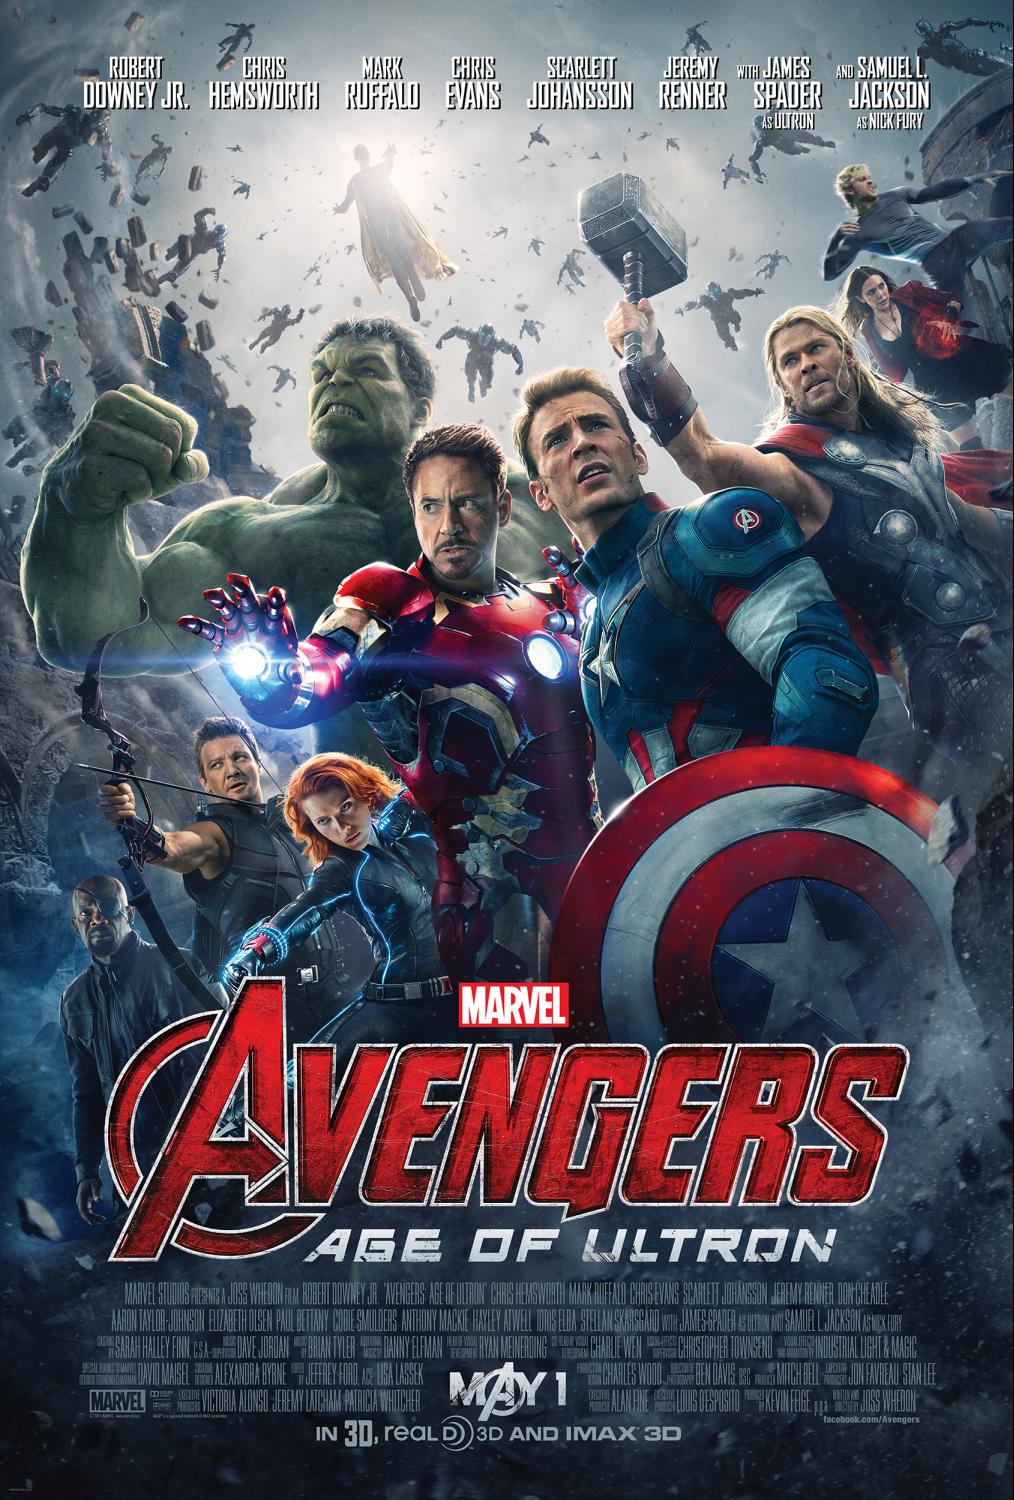 Win Marvel’s Avengers: Age of Ultron on Blu-Ray & $25 Paypal Cash